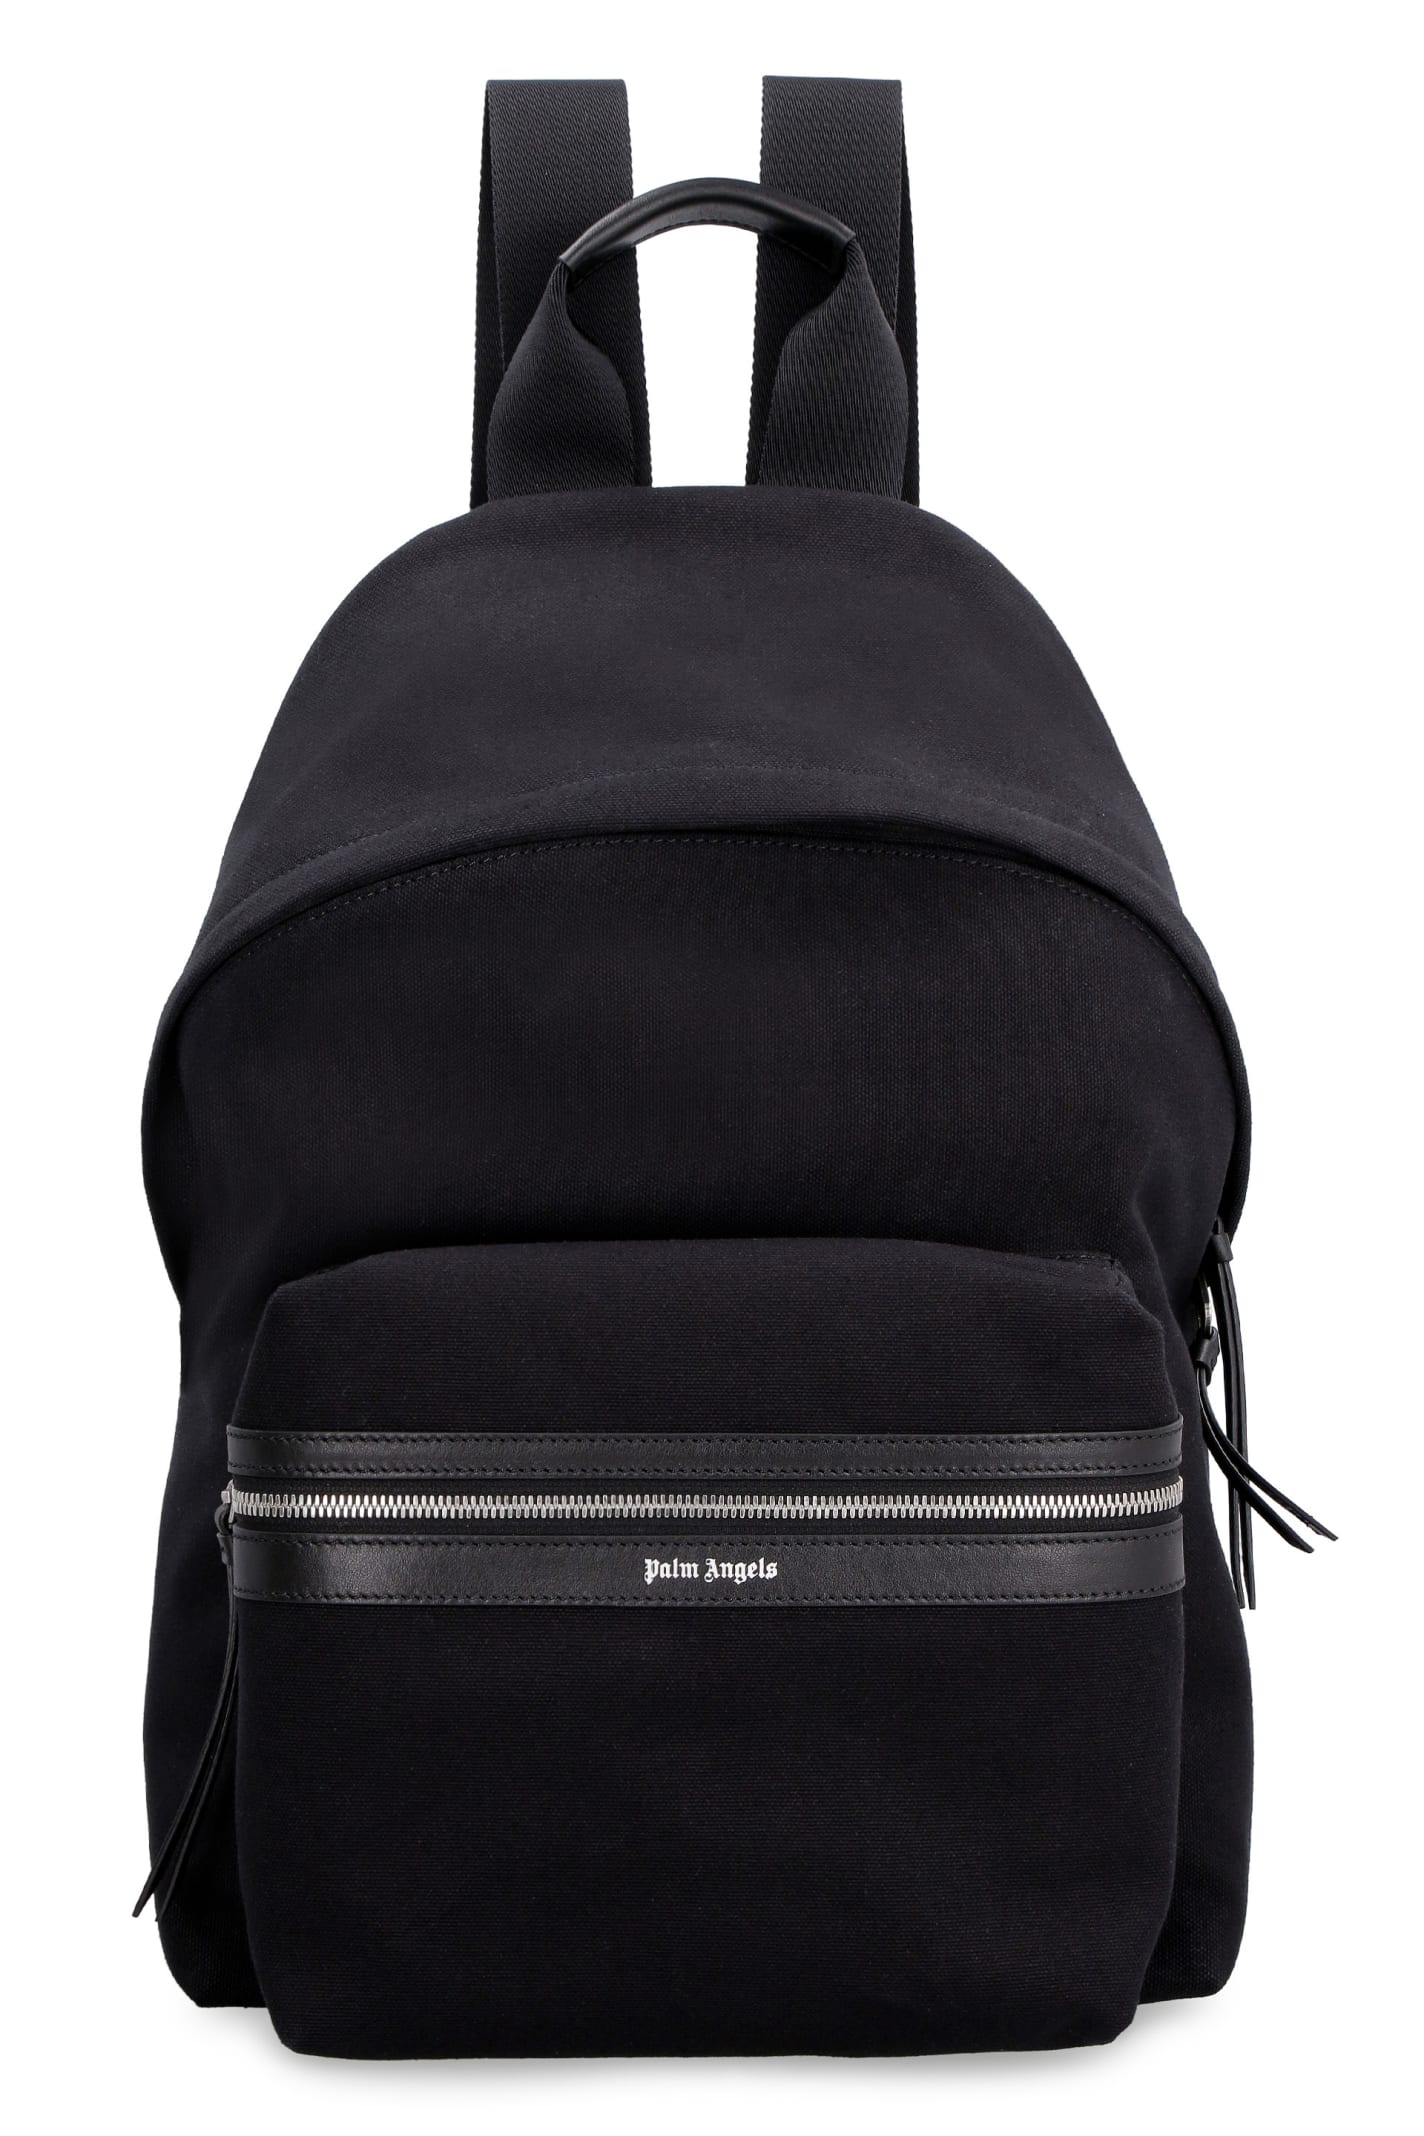 Palm Angels Canvas Backpack